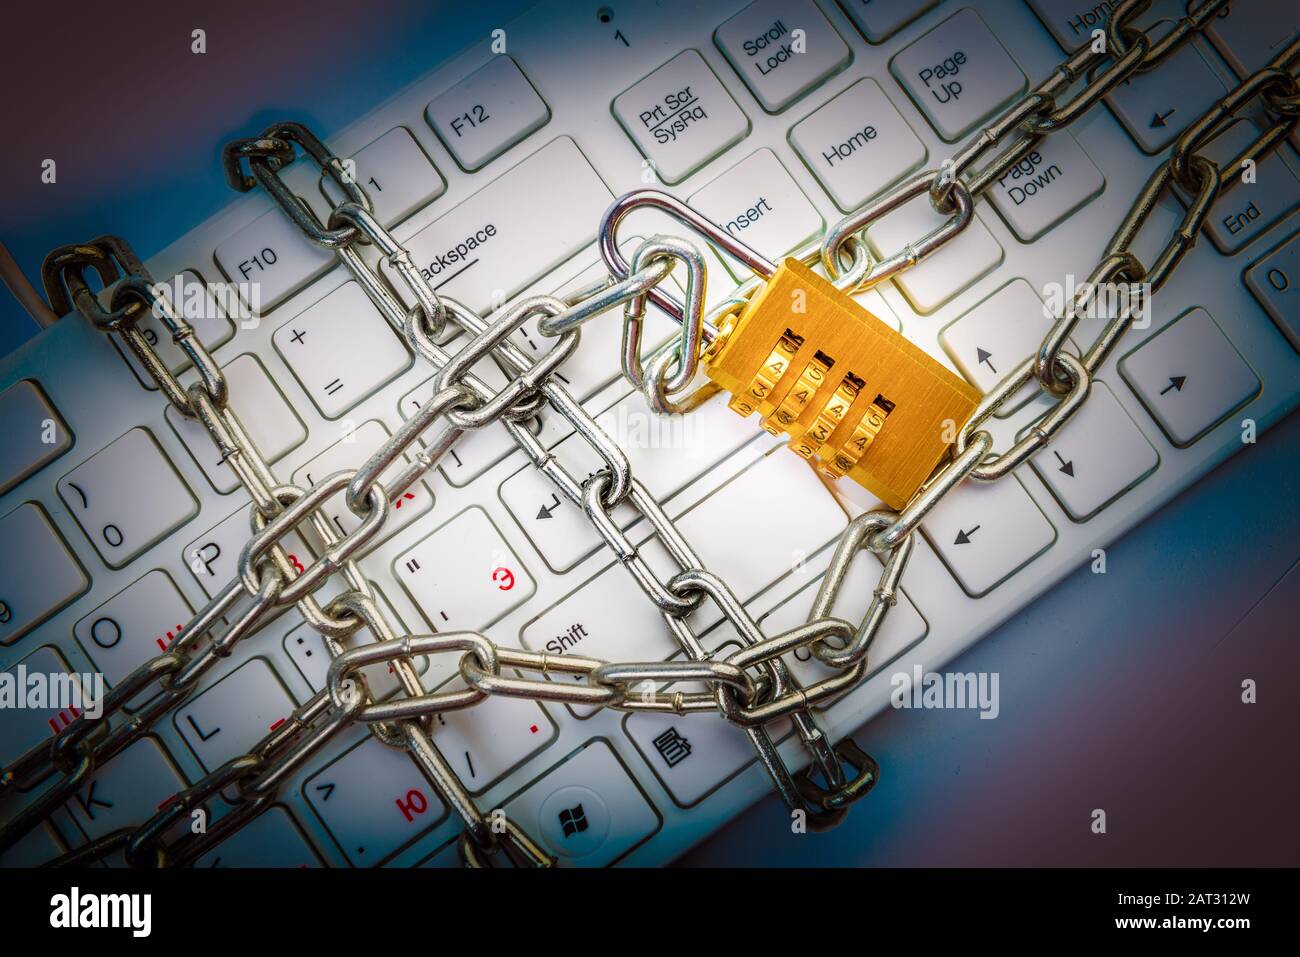 Keyboard locked in chain with padlock. Internet freedom concept Stock Photo